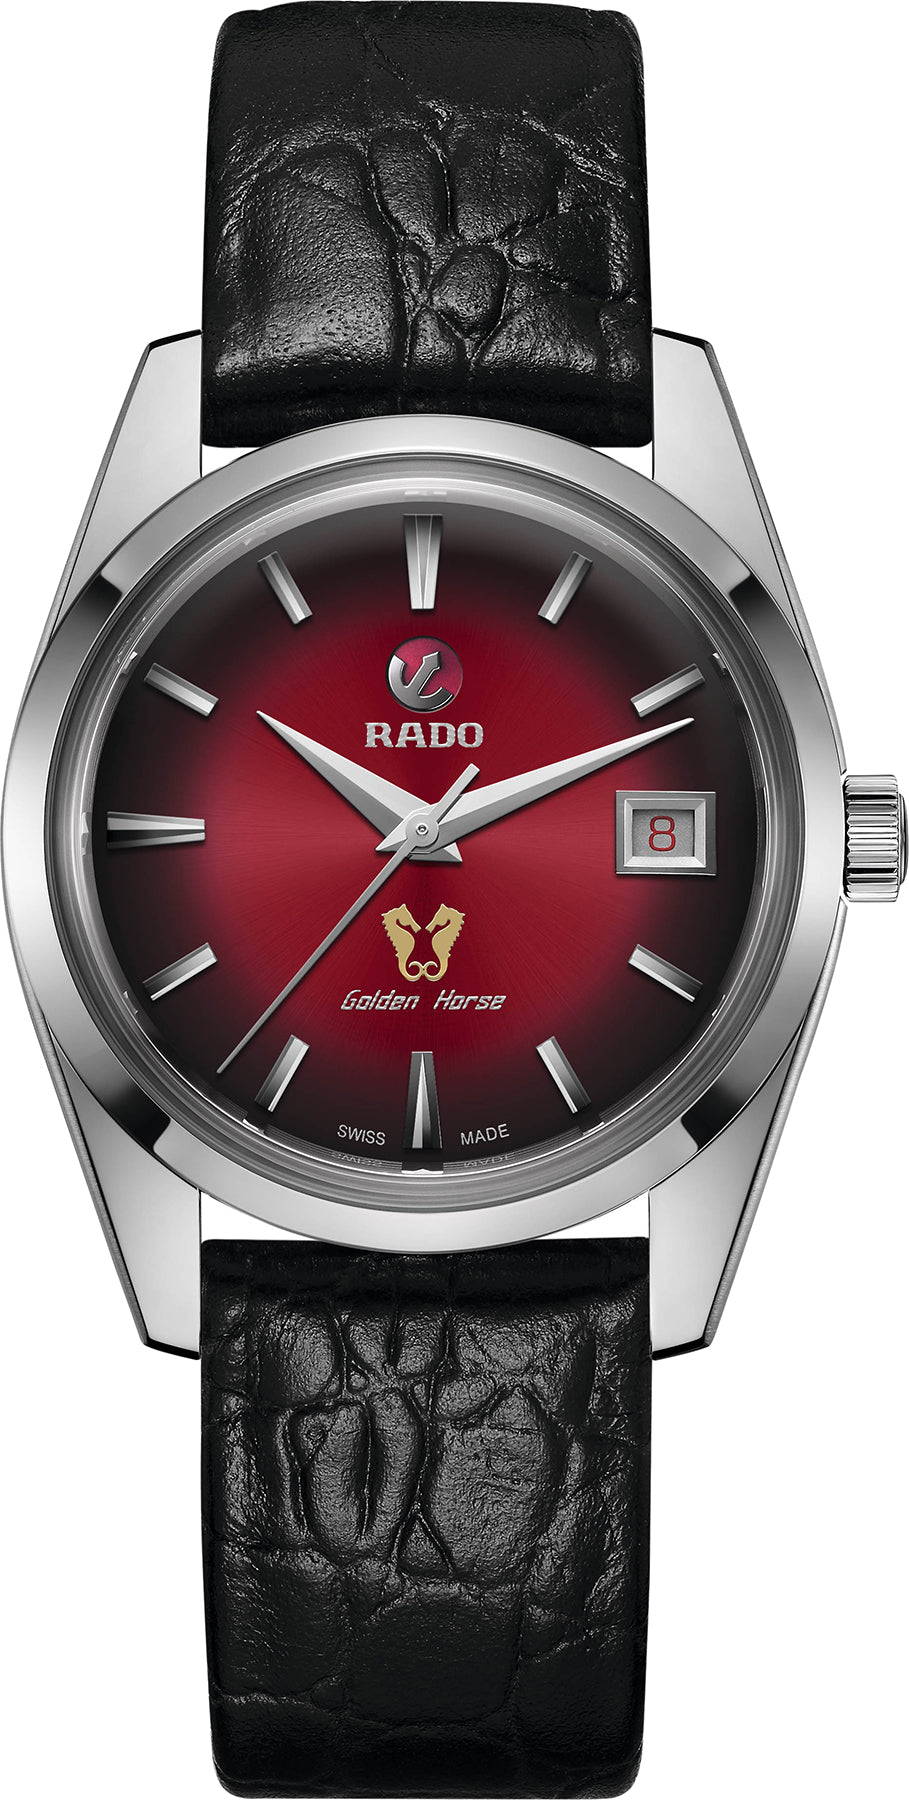 Rado Watch Golden Horse 1957 Automatic Limited Edition